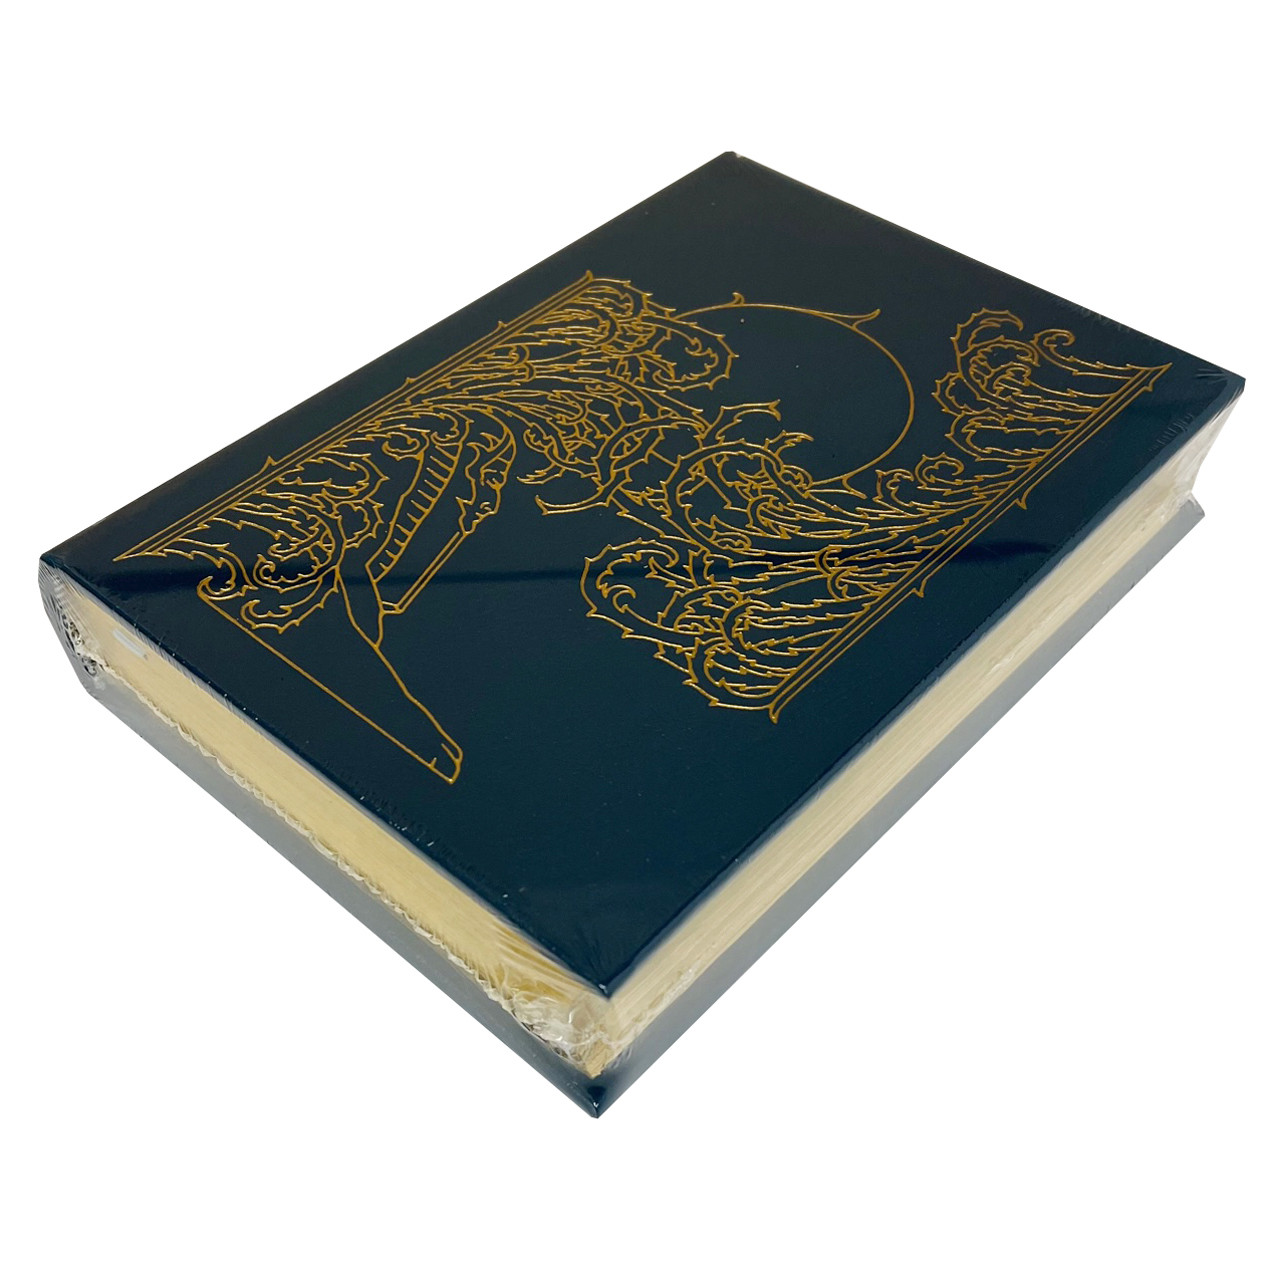 Dan Simmons "Hyperion" Limited Edition, Leather Bound Collector's Edition [Sealed]